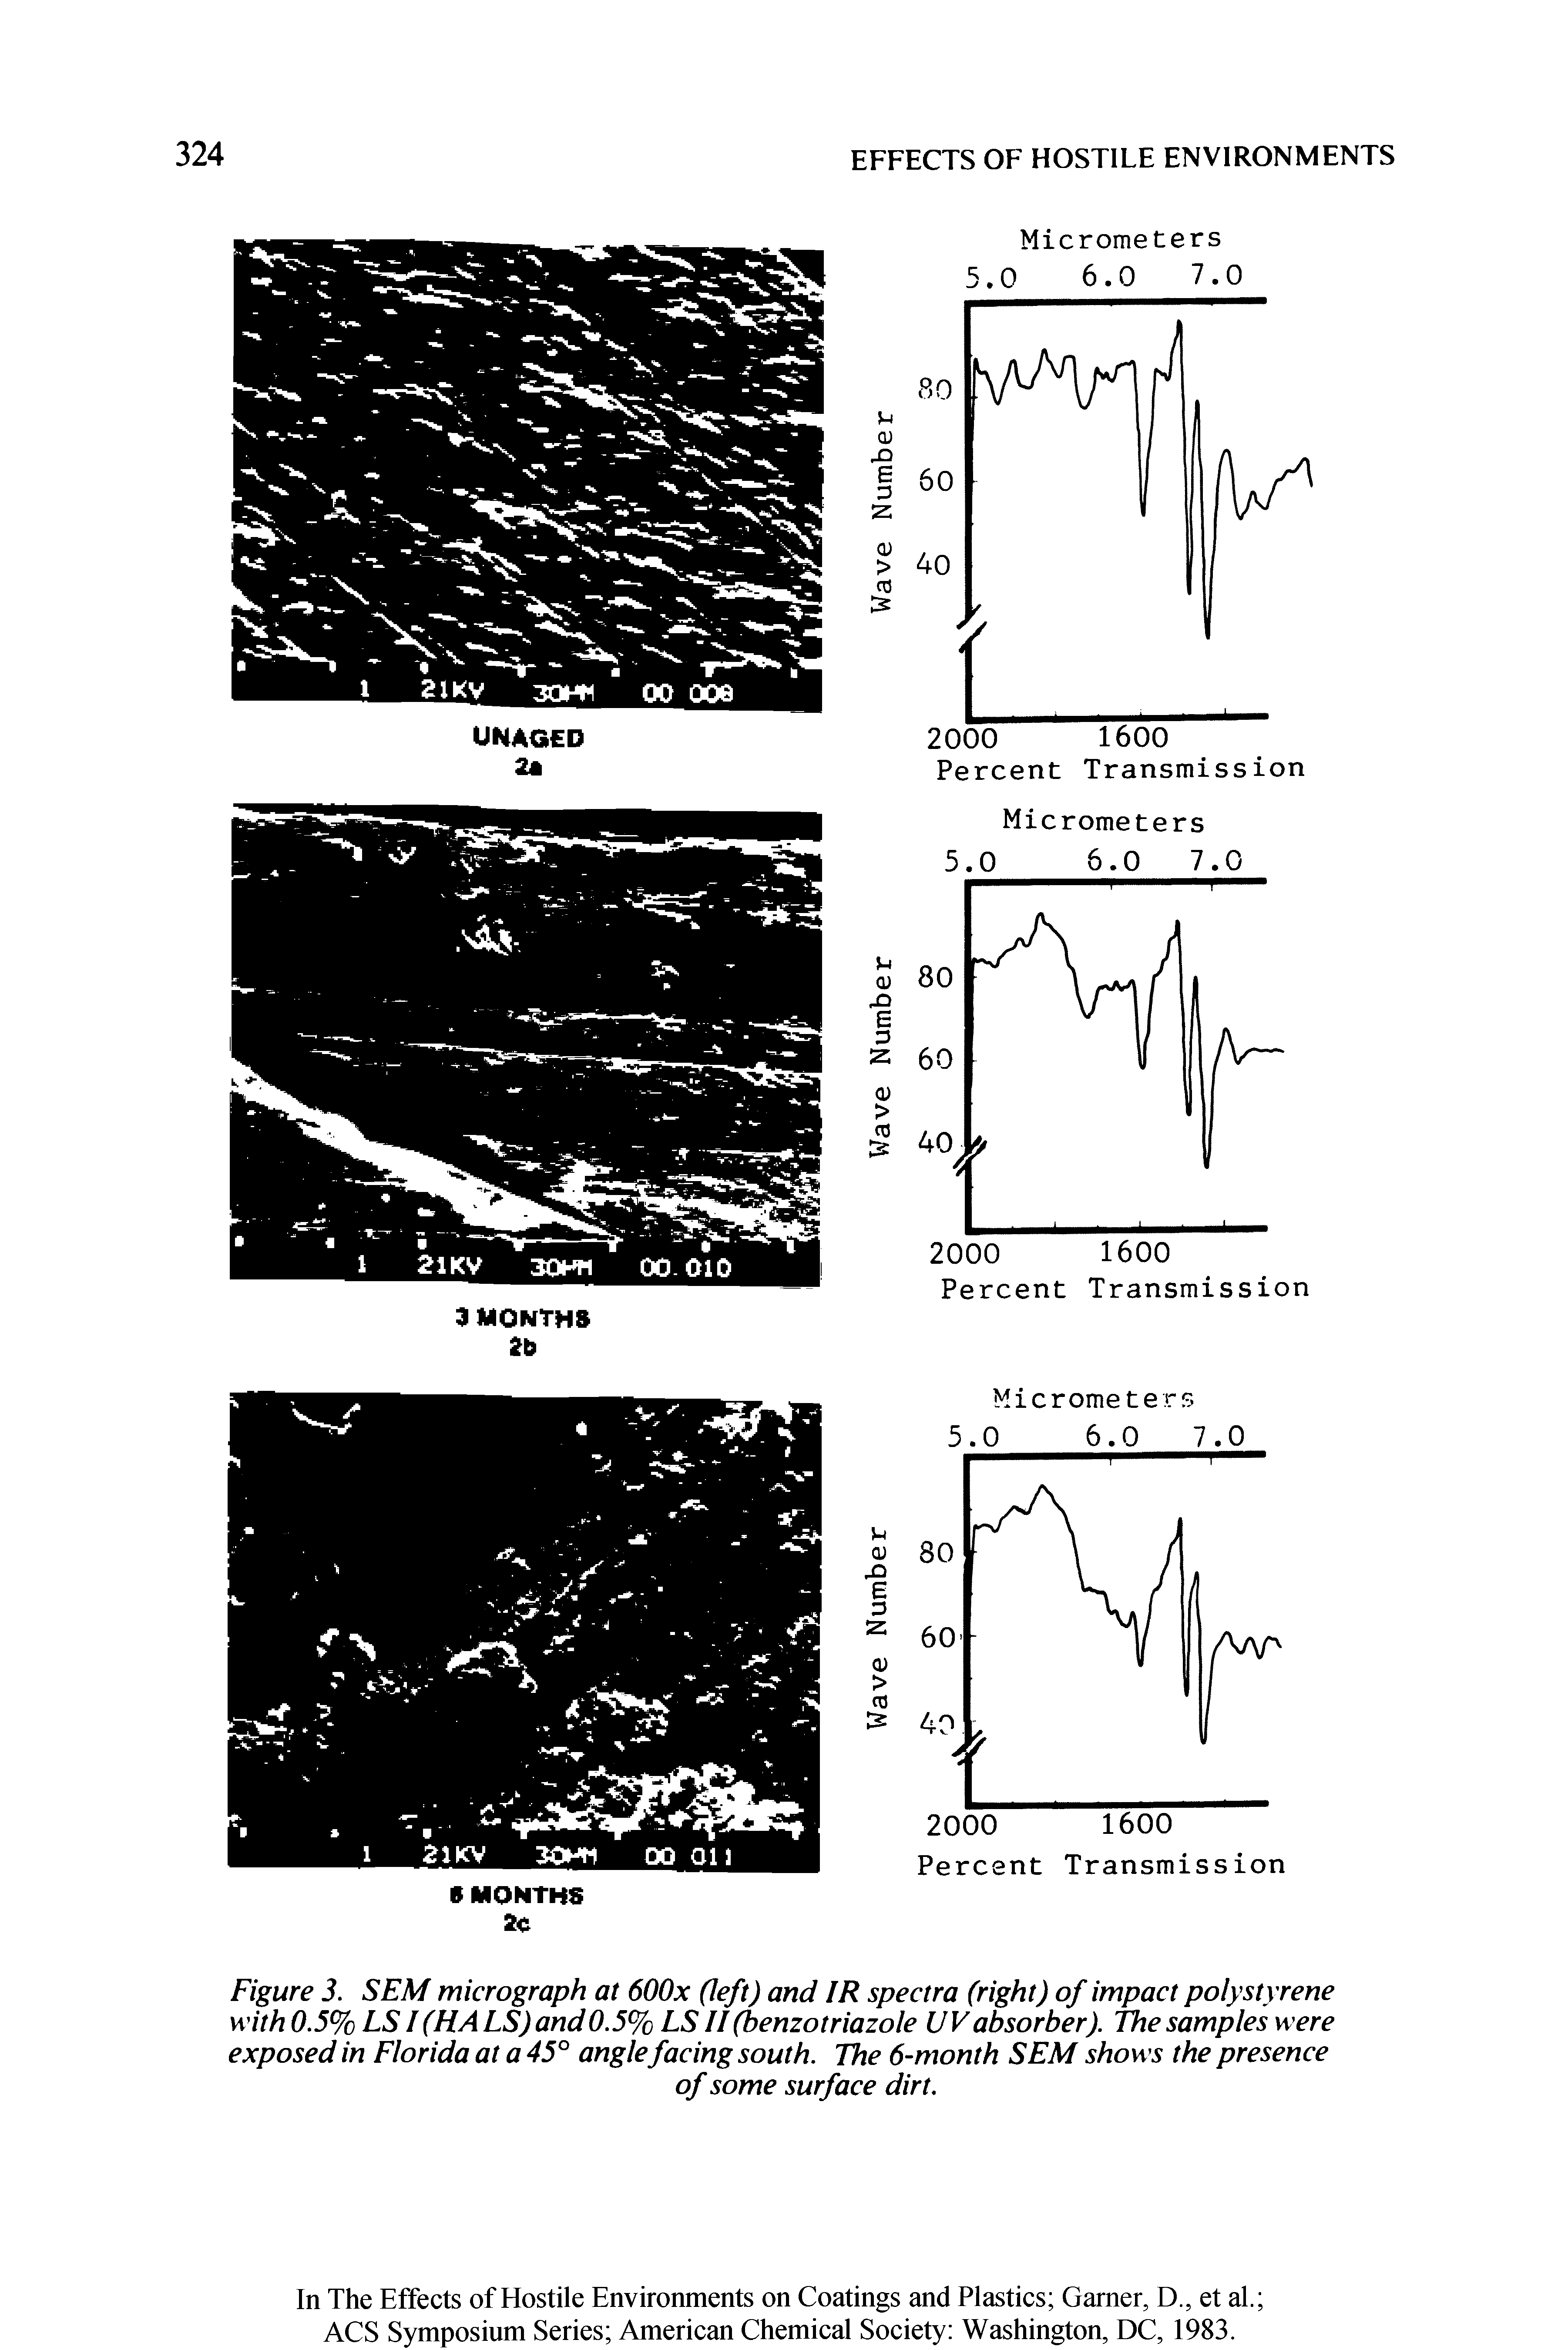 Figure 3. SEM micrograph at 600x (left) and IR spectra (right) of impact polystyrene with 0.5% LSI (HA LS) and 0.5% LS II (benzotriazole UV absorber). The samples were exposed in Florida at a 45° anglefacing south. The 6-month SEM shows the presence...